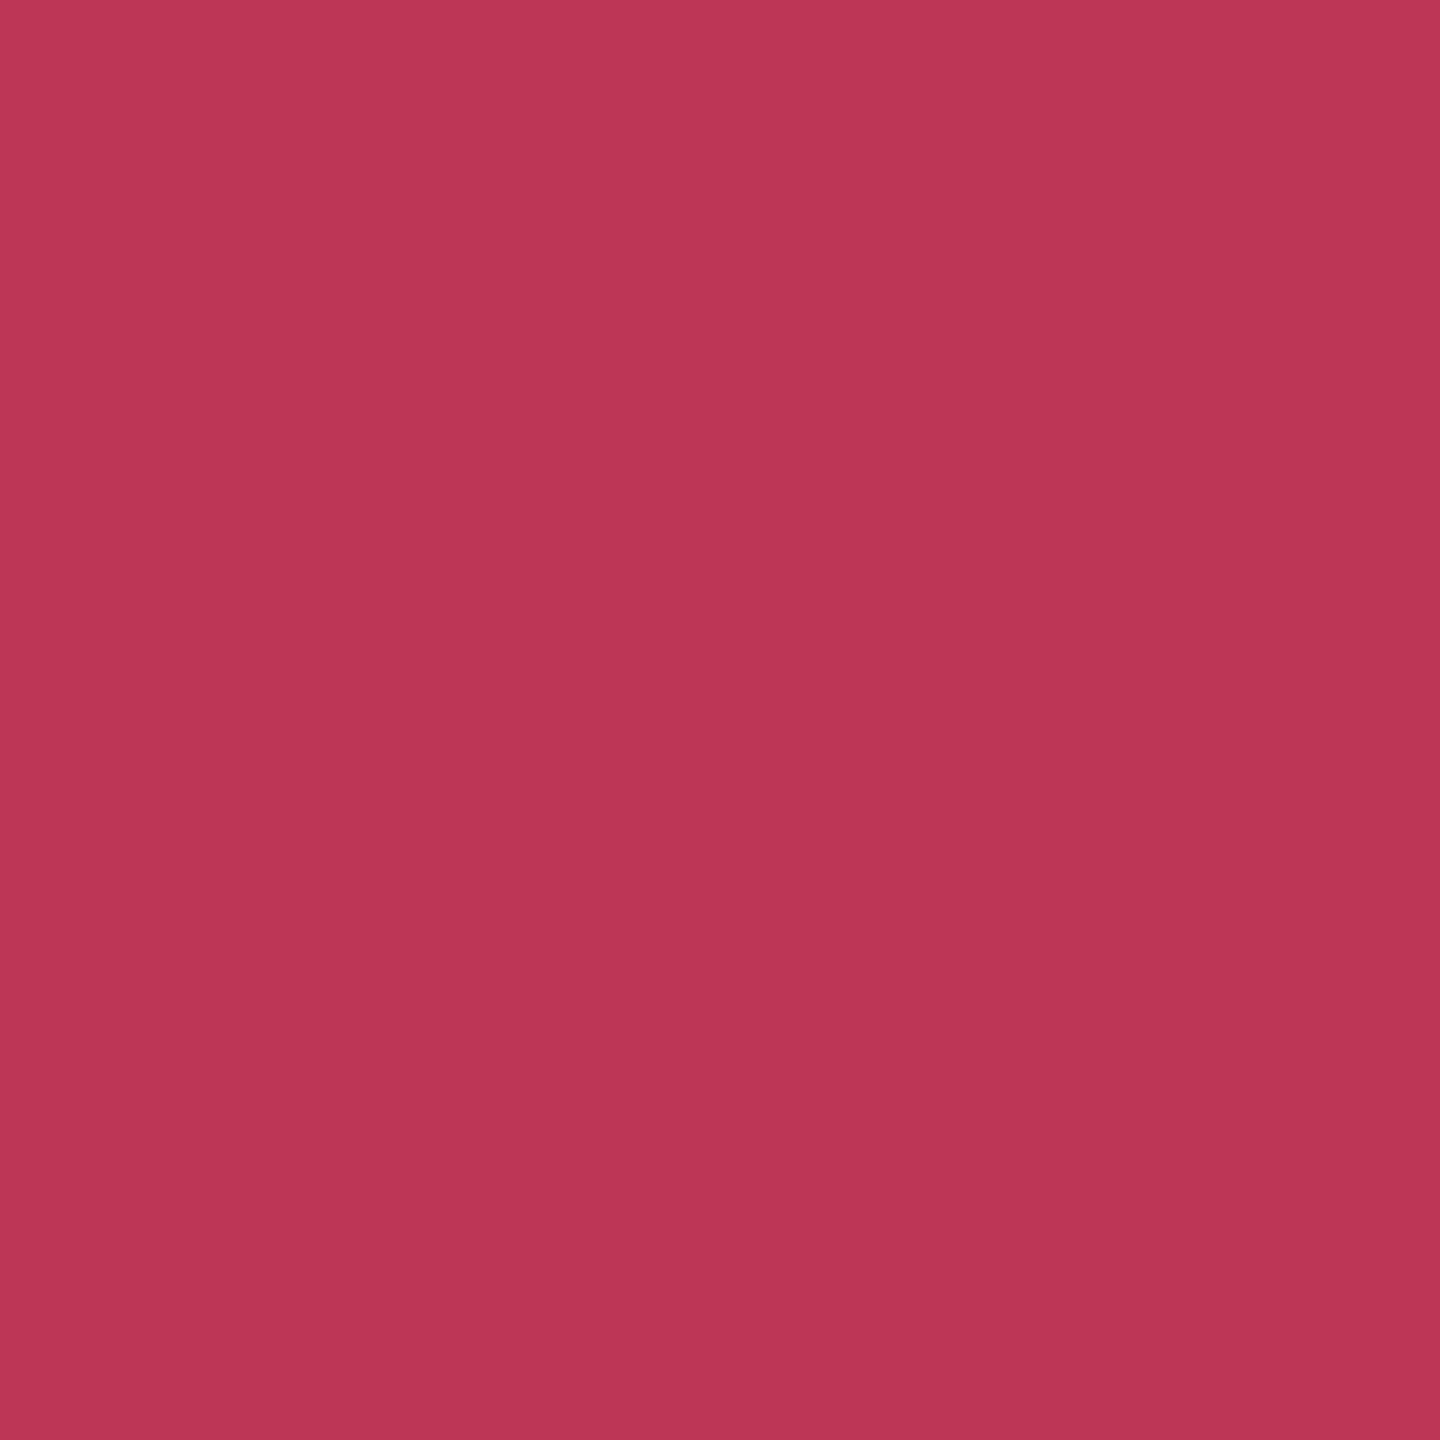 A red background with no text - Magenta